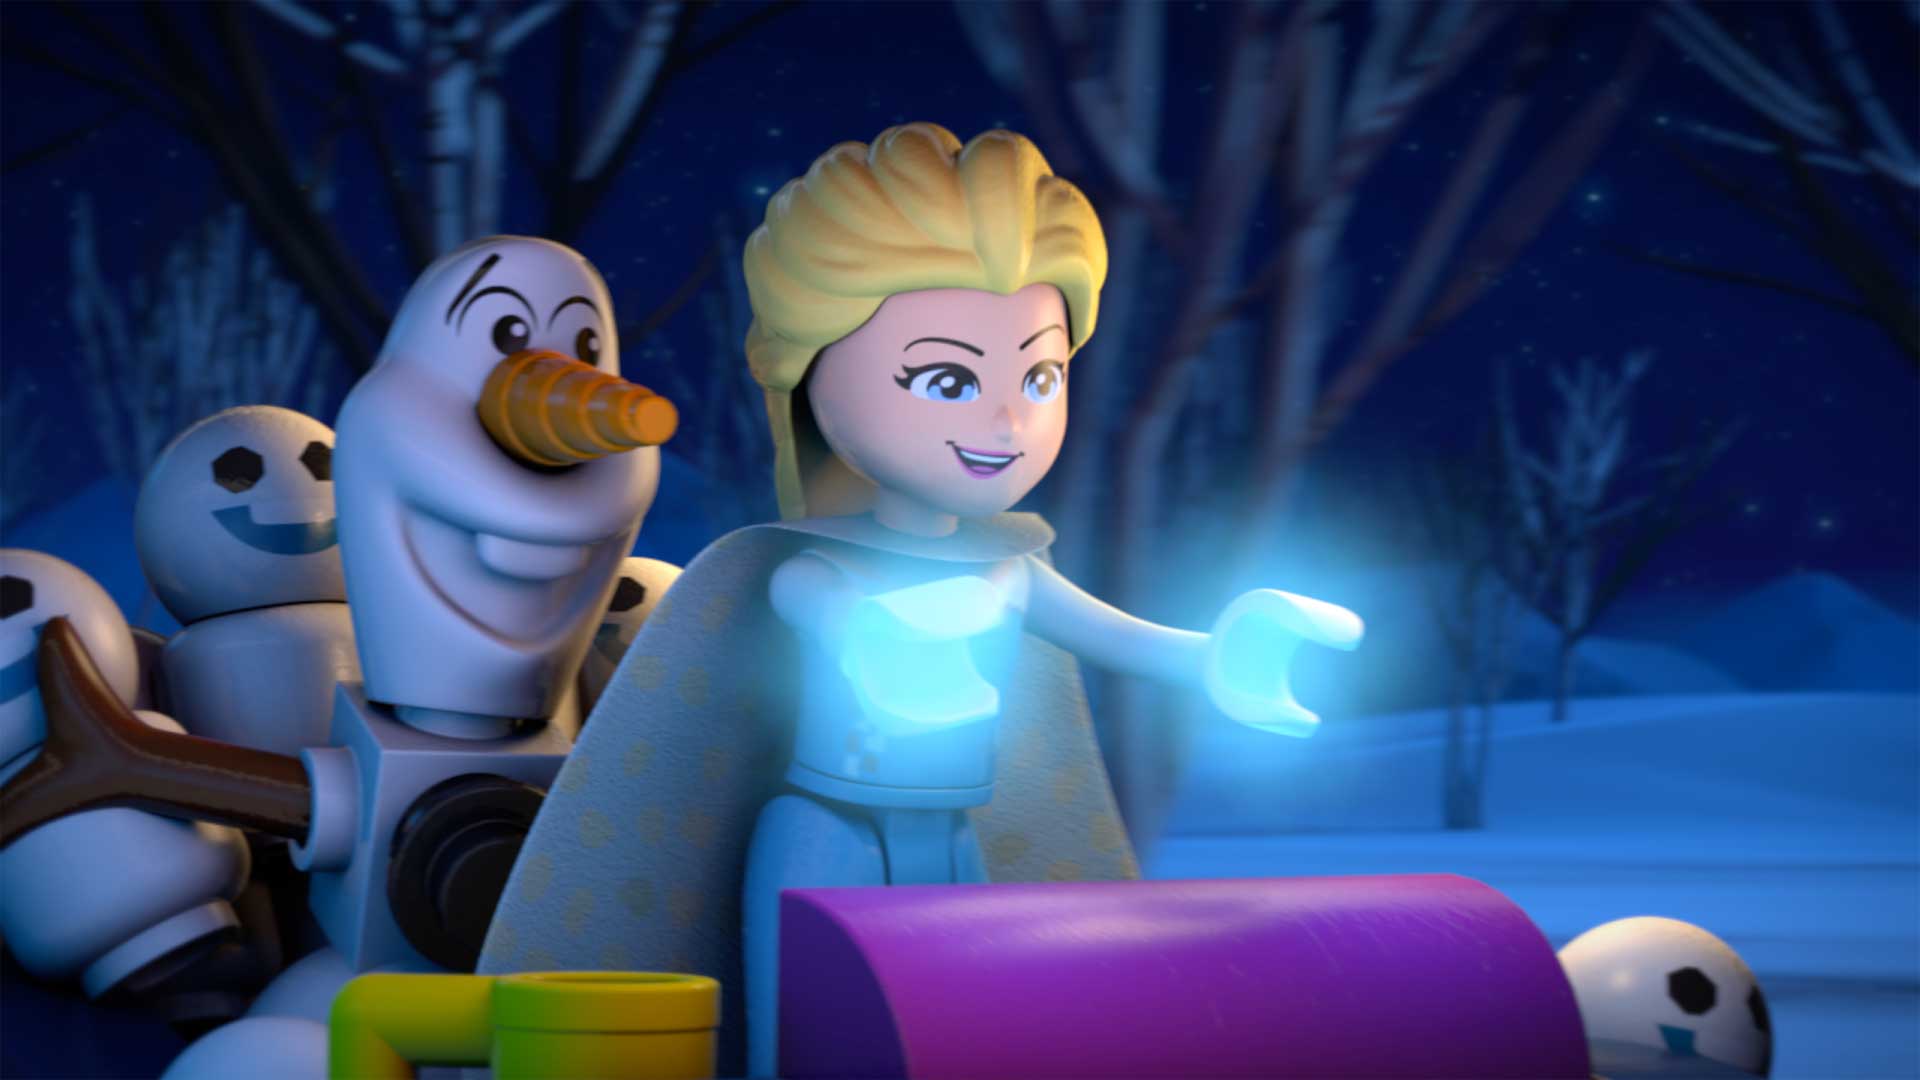 Frozen Northern Lights - Elsa and Olaf LEGO animated short